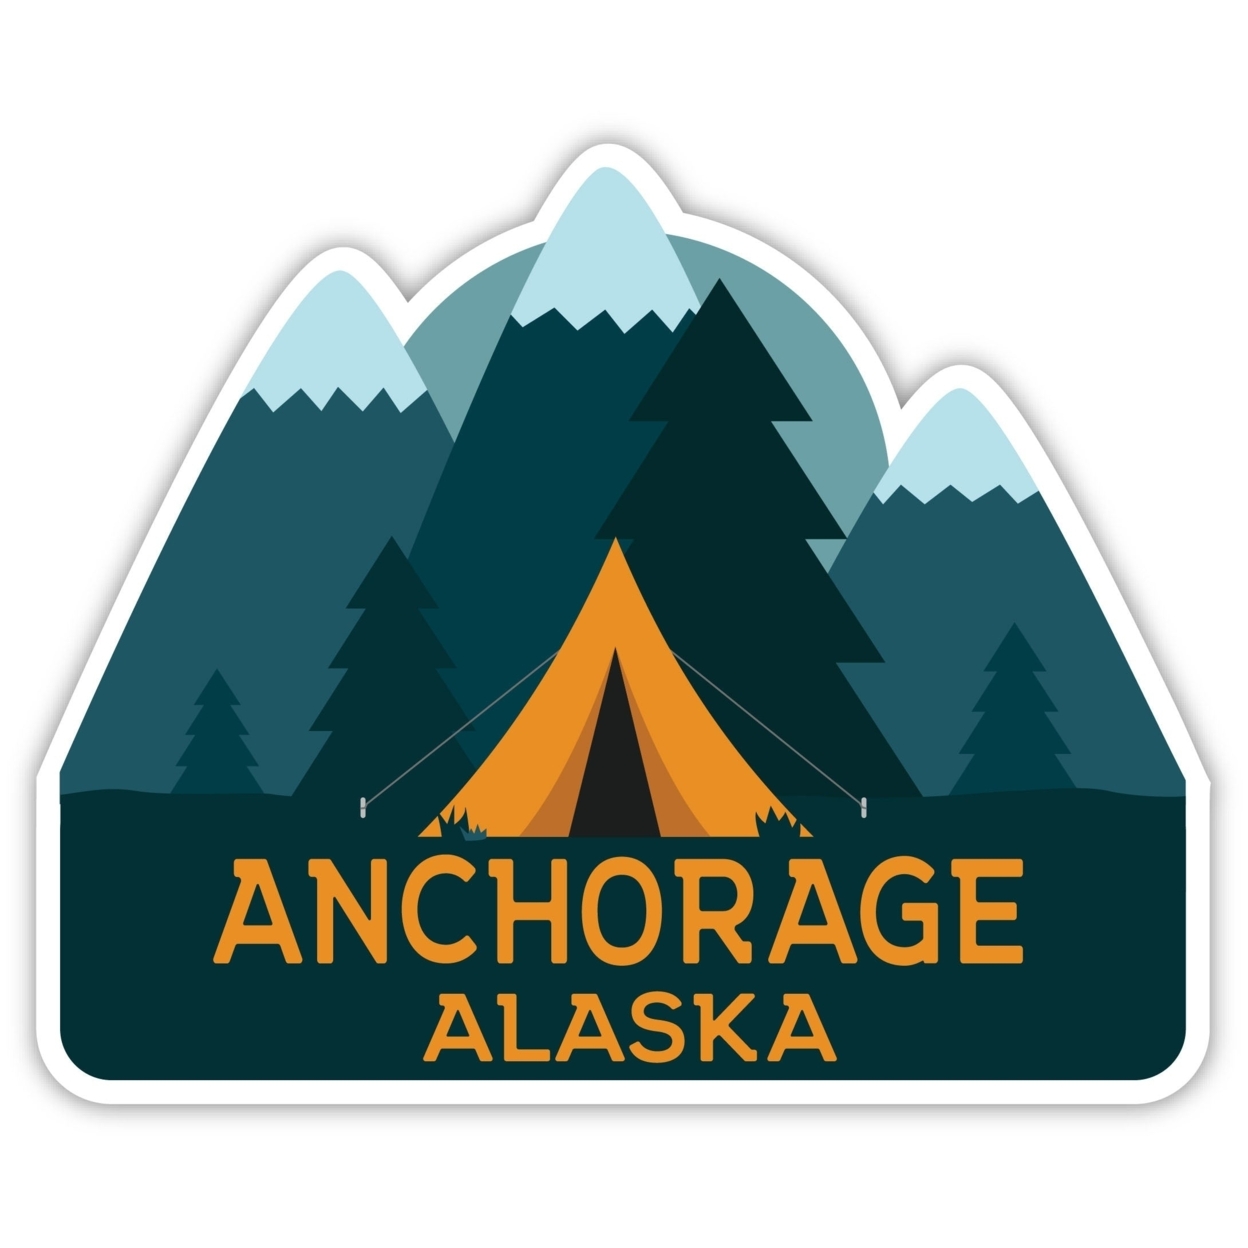 Anchorage Alaska Souvenir Decorative Stickers (Choose Theme And Size) - 4-Pack, 12-Inch, Tent